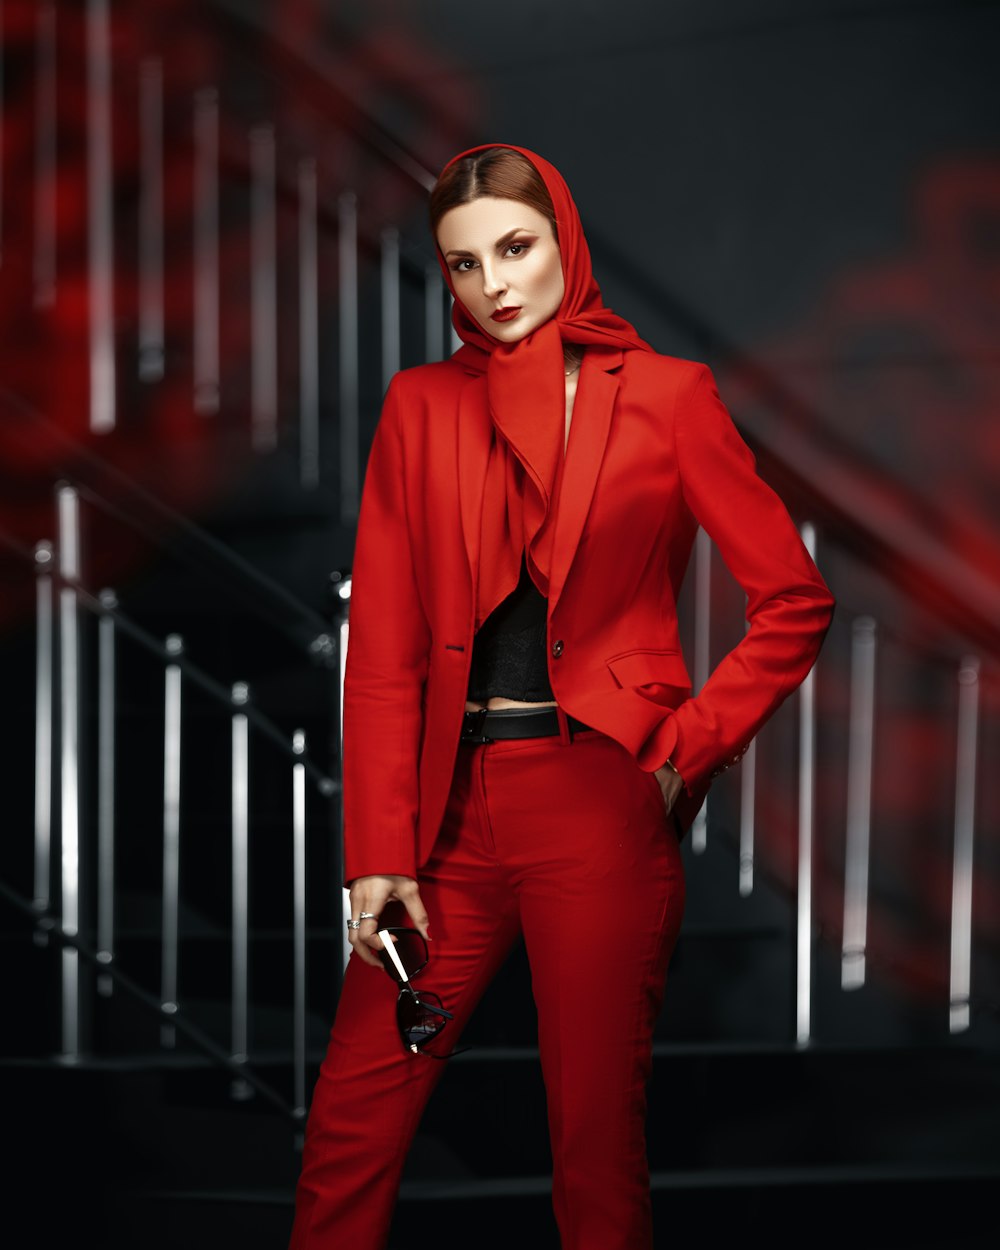 a woman in a red suit with a gun